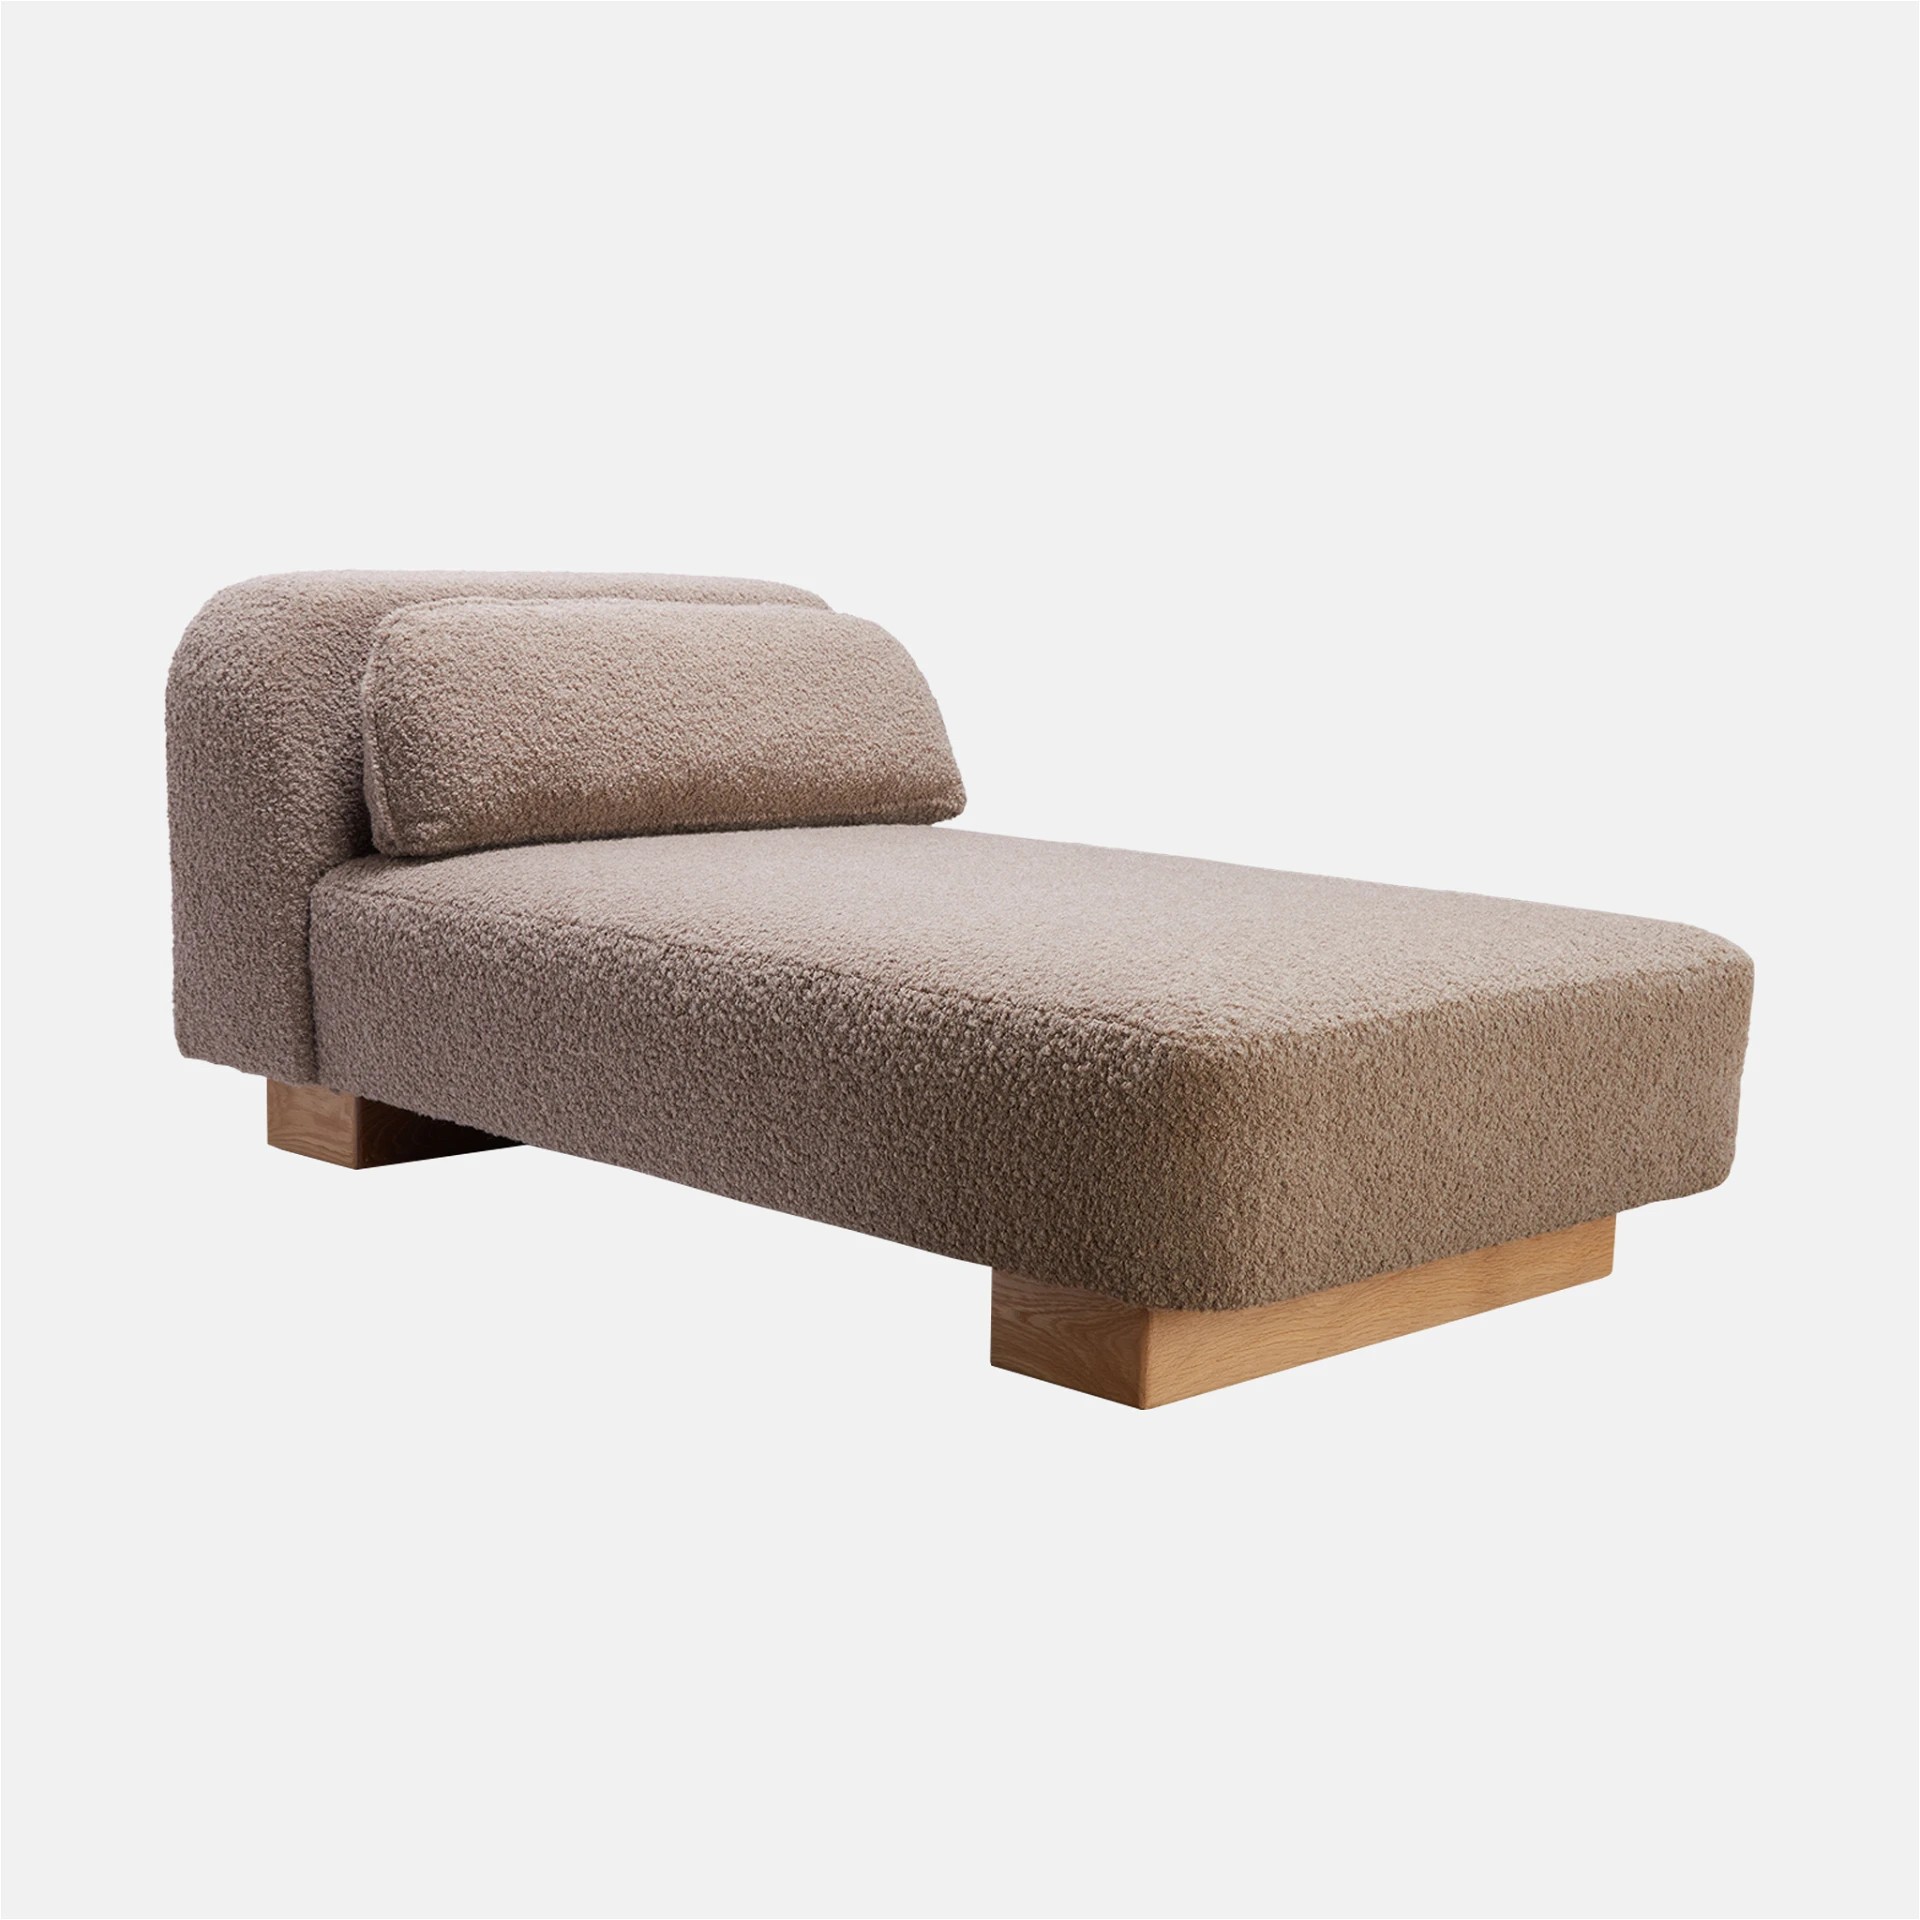 The image of an Seymour Chaise product